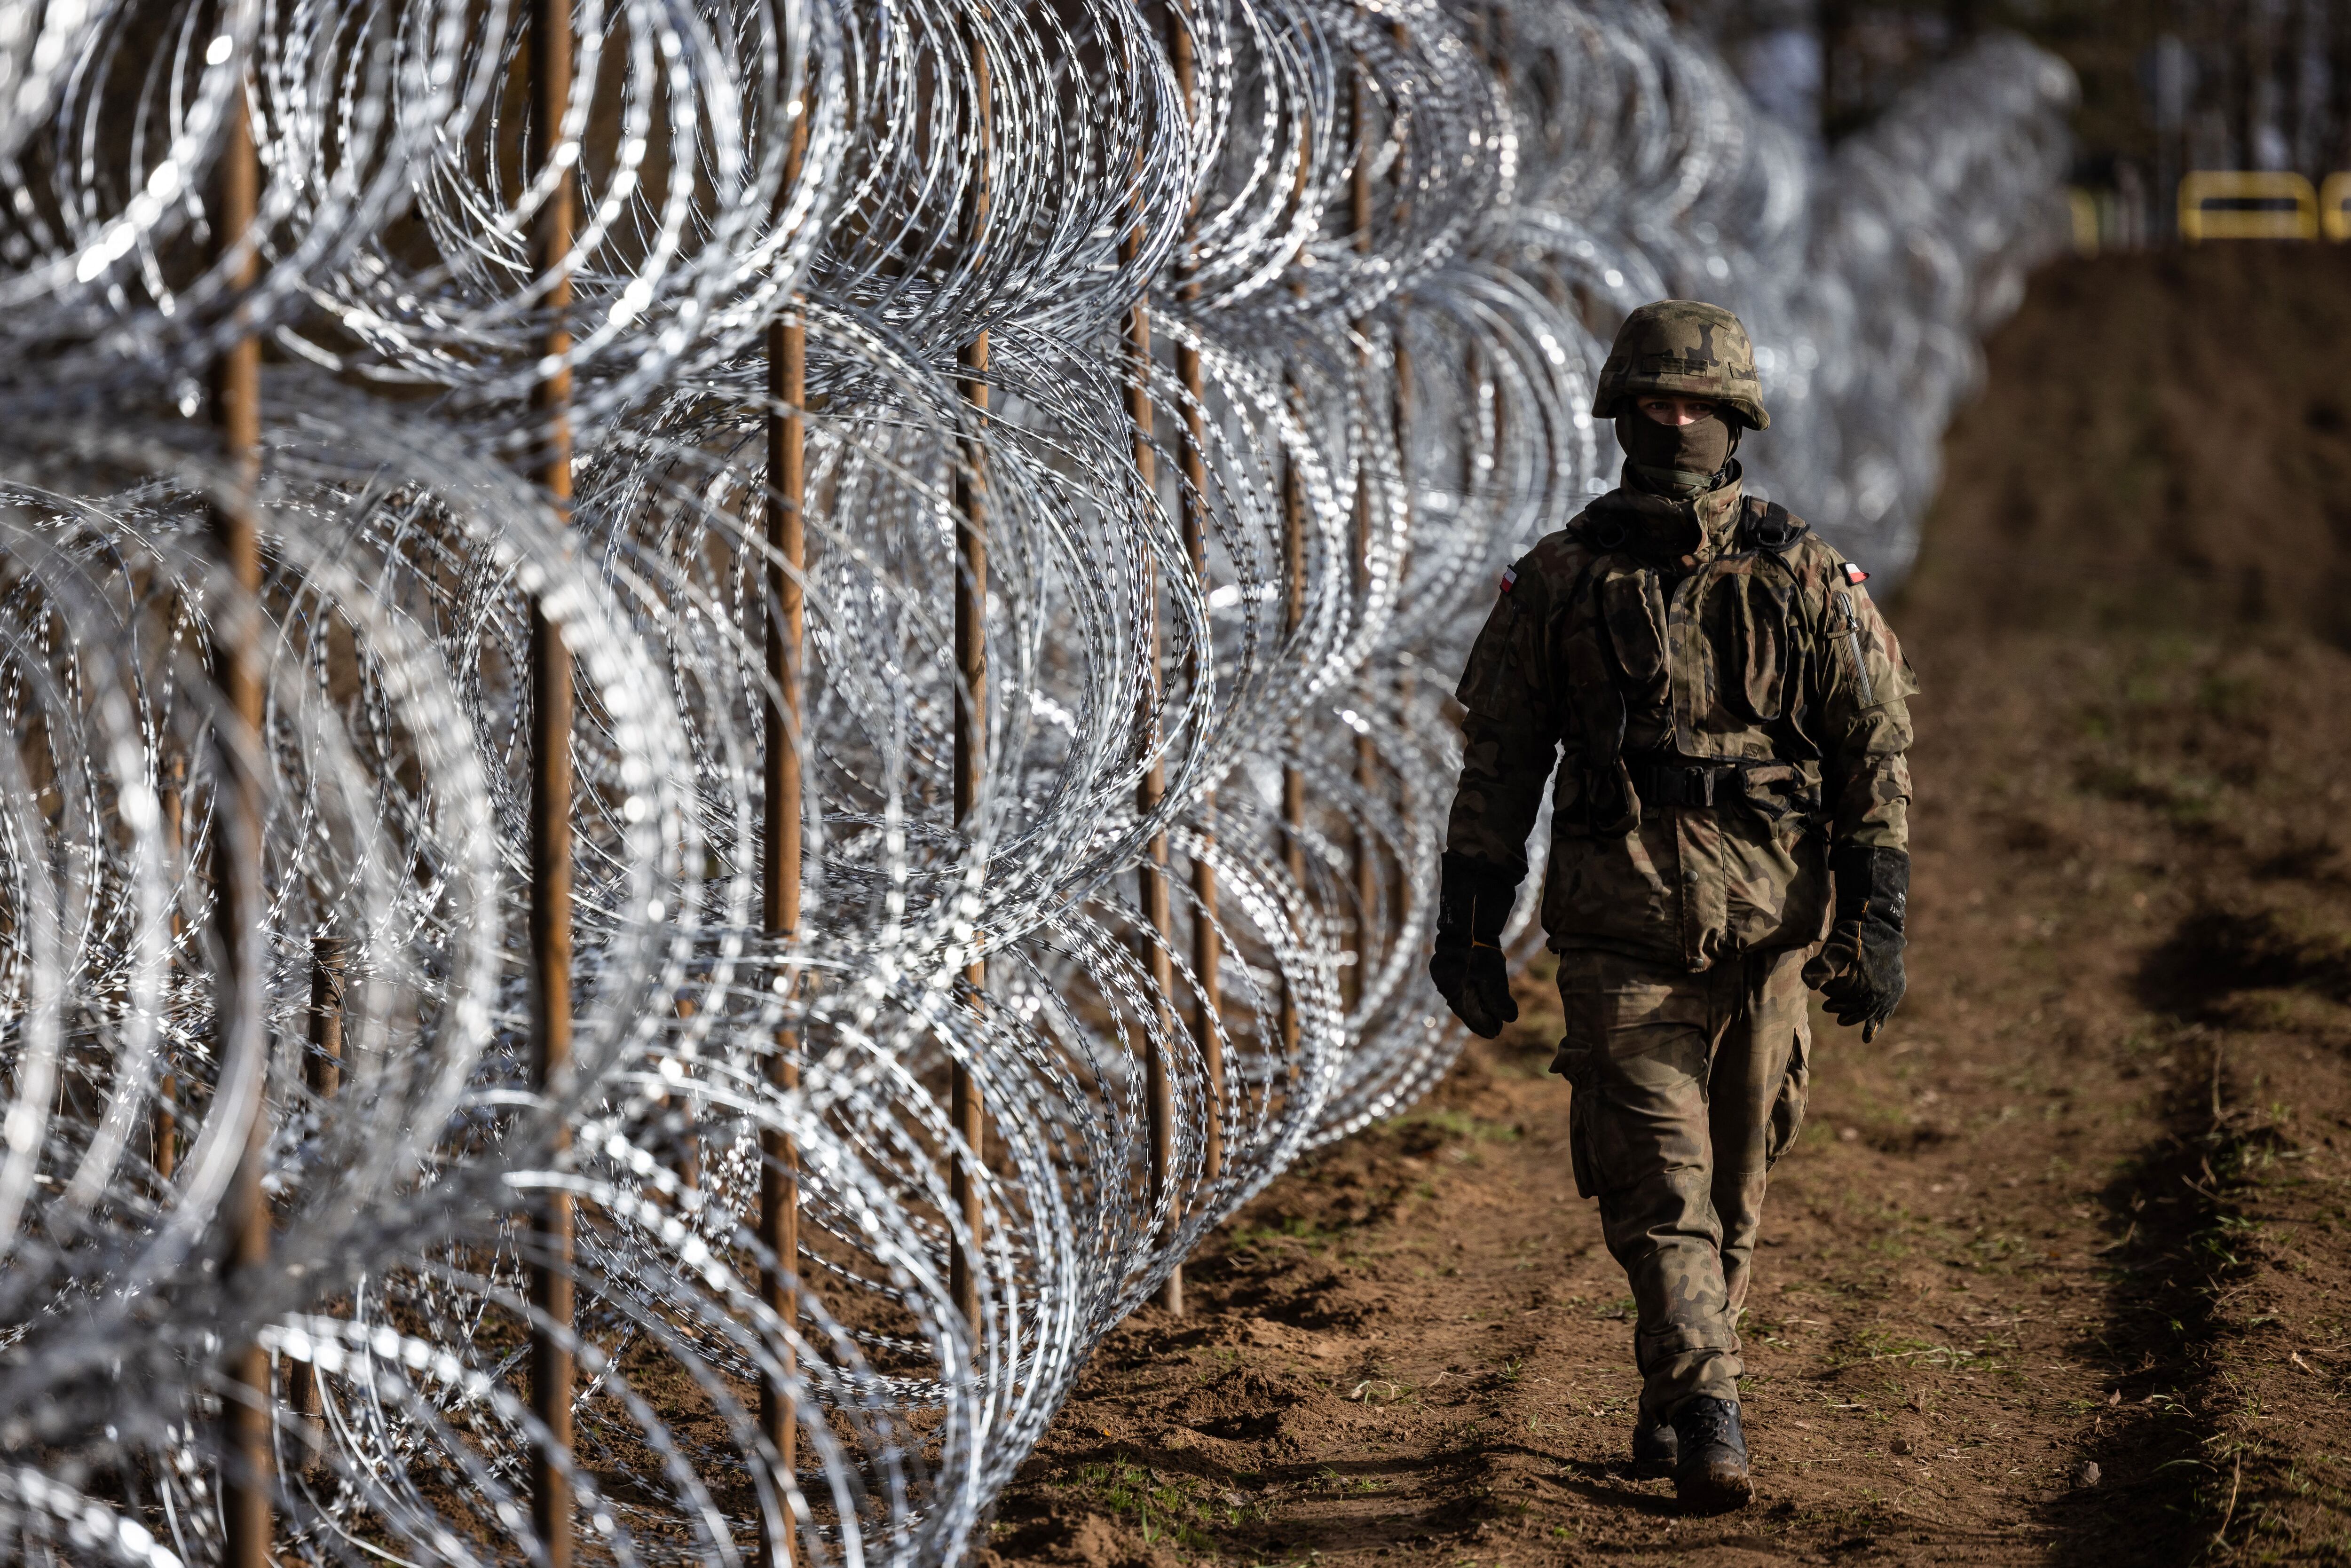 A Polish soldier is pictured during the construction of a concertina fence on the Polish-Russian border in the Kaliningrad Oblast, Zerdziny region, north-eastern Poland, on November 3, 2022. (Photo by Wojtek RADWANSKI / AFP)